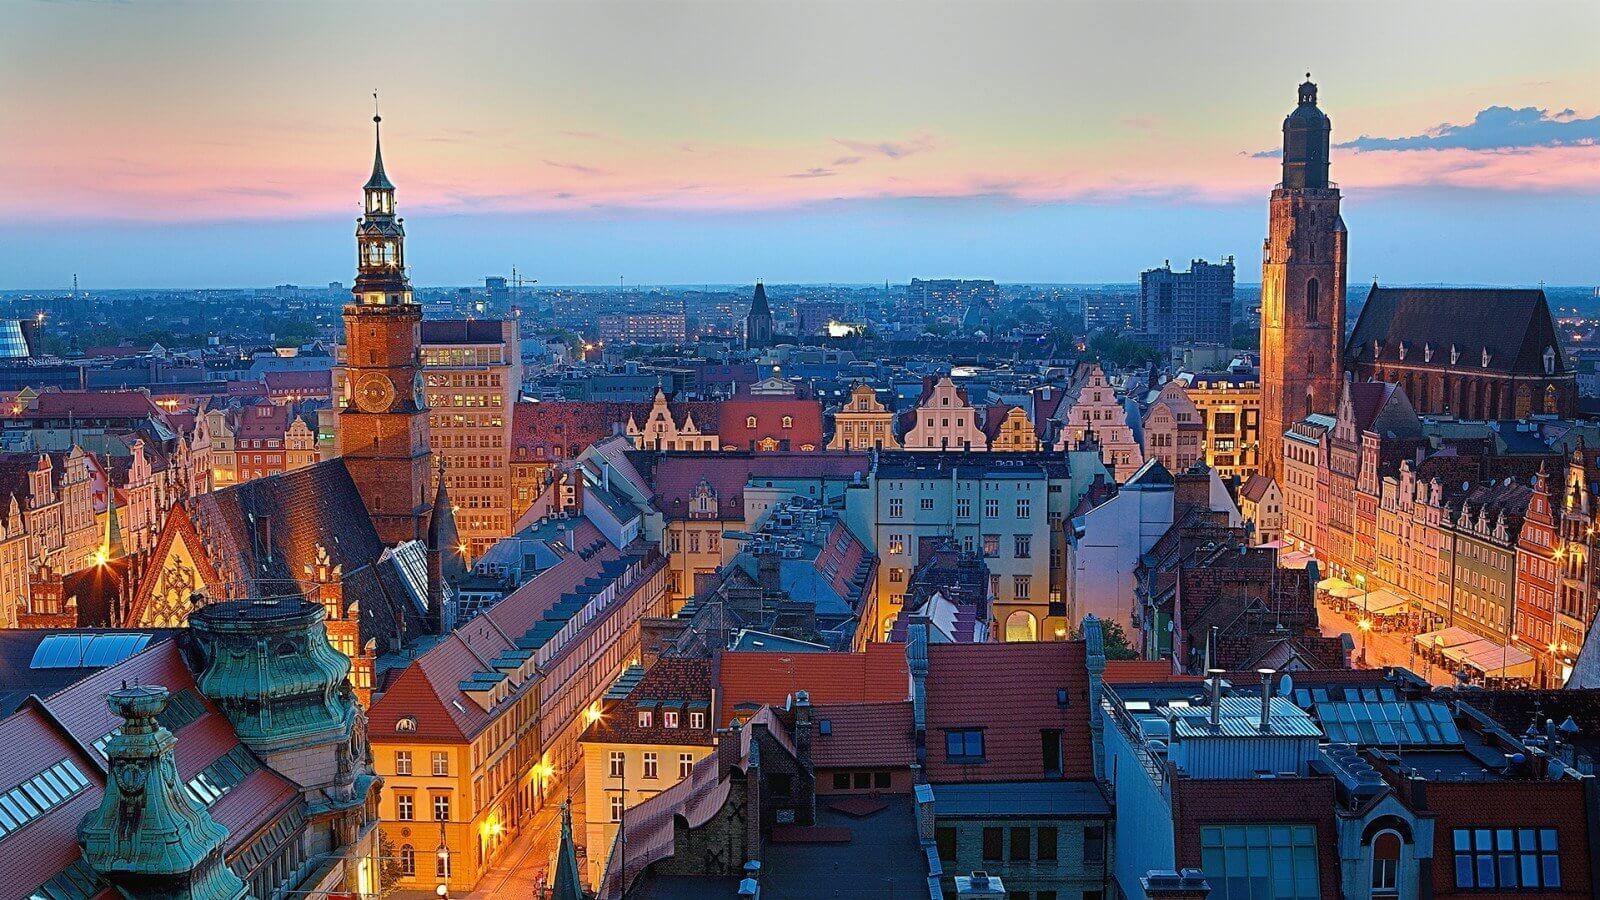 Wroclaw Poland Travel Guide - Travel East and Central Europe